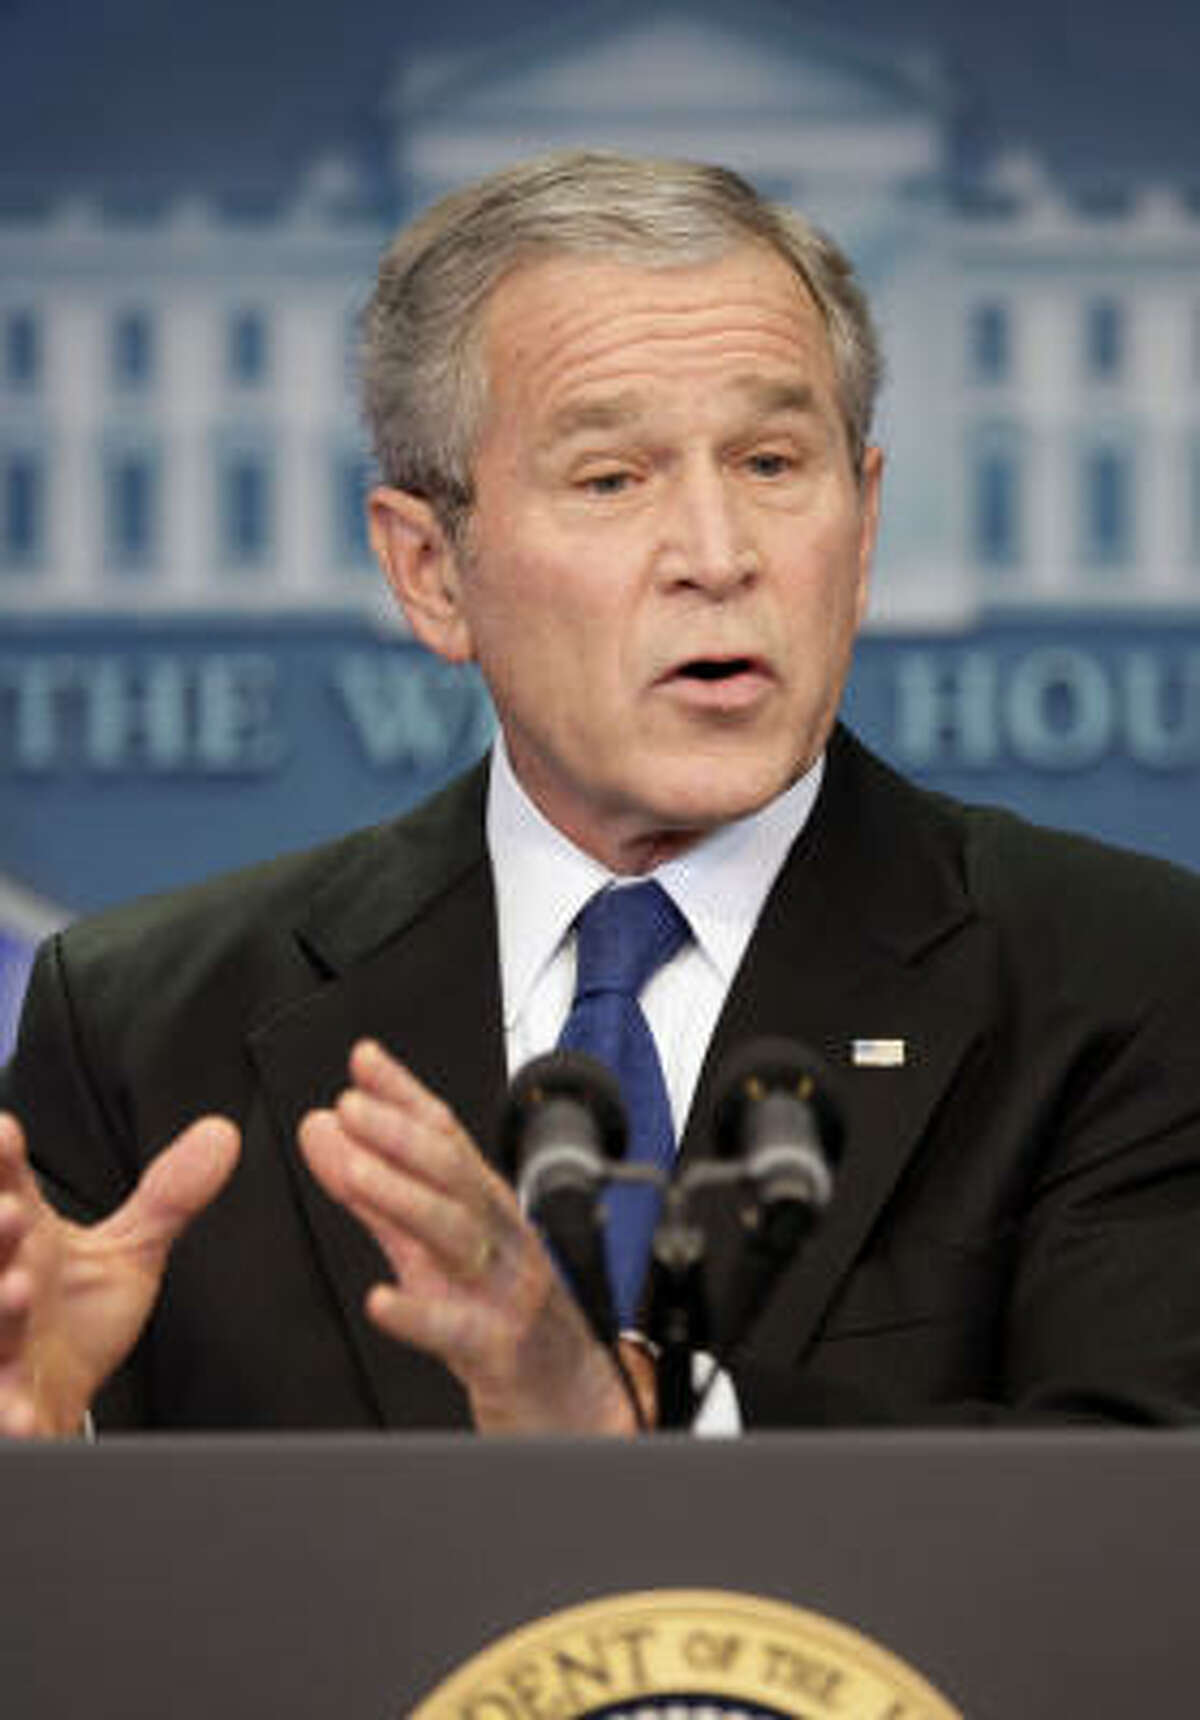 "What's to say (Iran) couldn't start another covert nuclear weapons program," President Bush said at a news conference today.